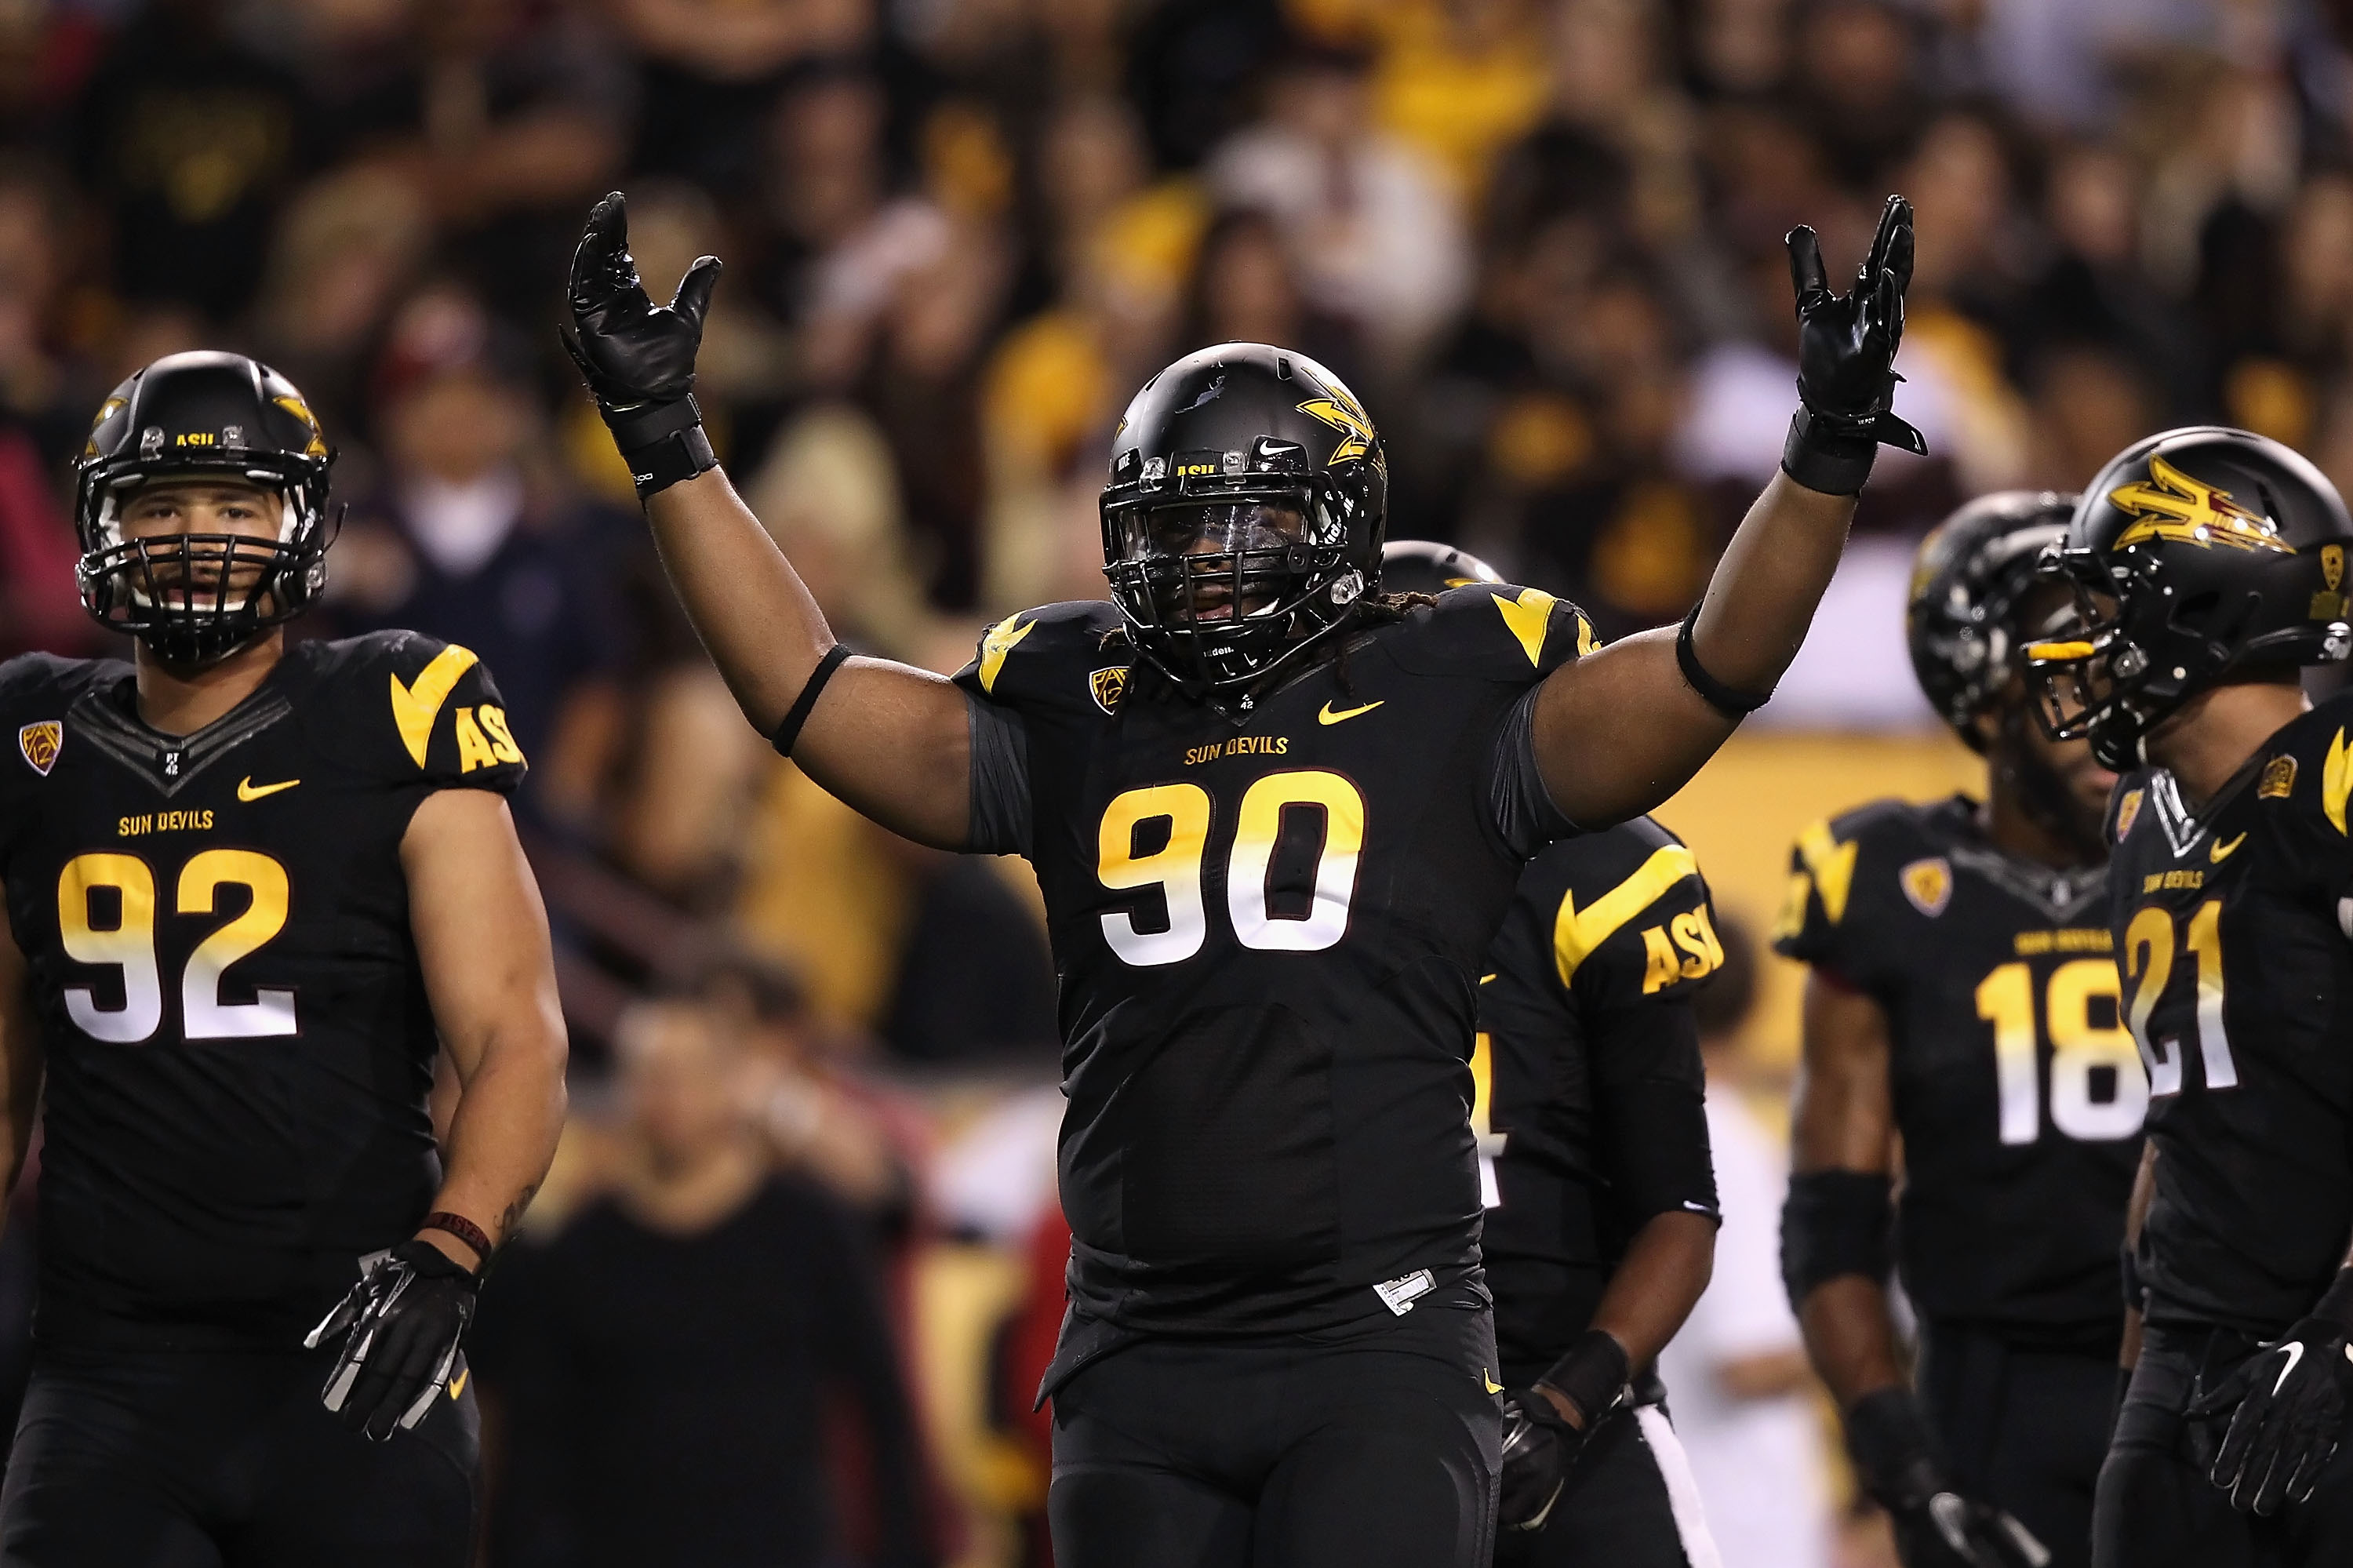 ASU Football: How the Sun Devils will look to replace an all-time